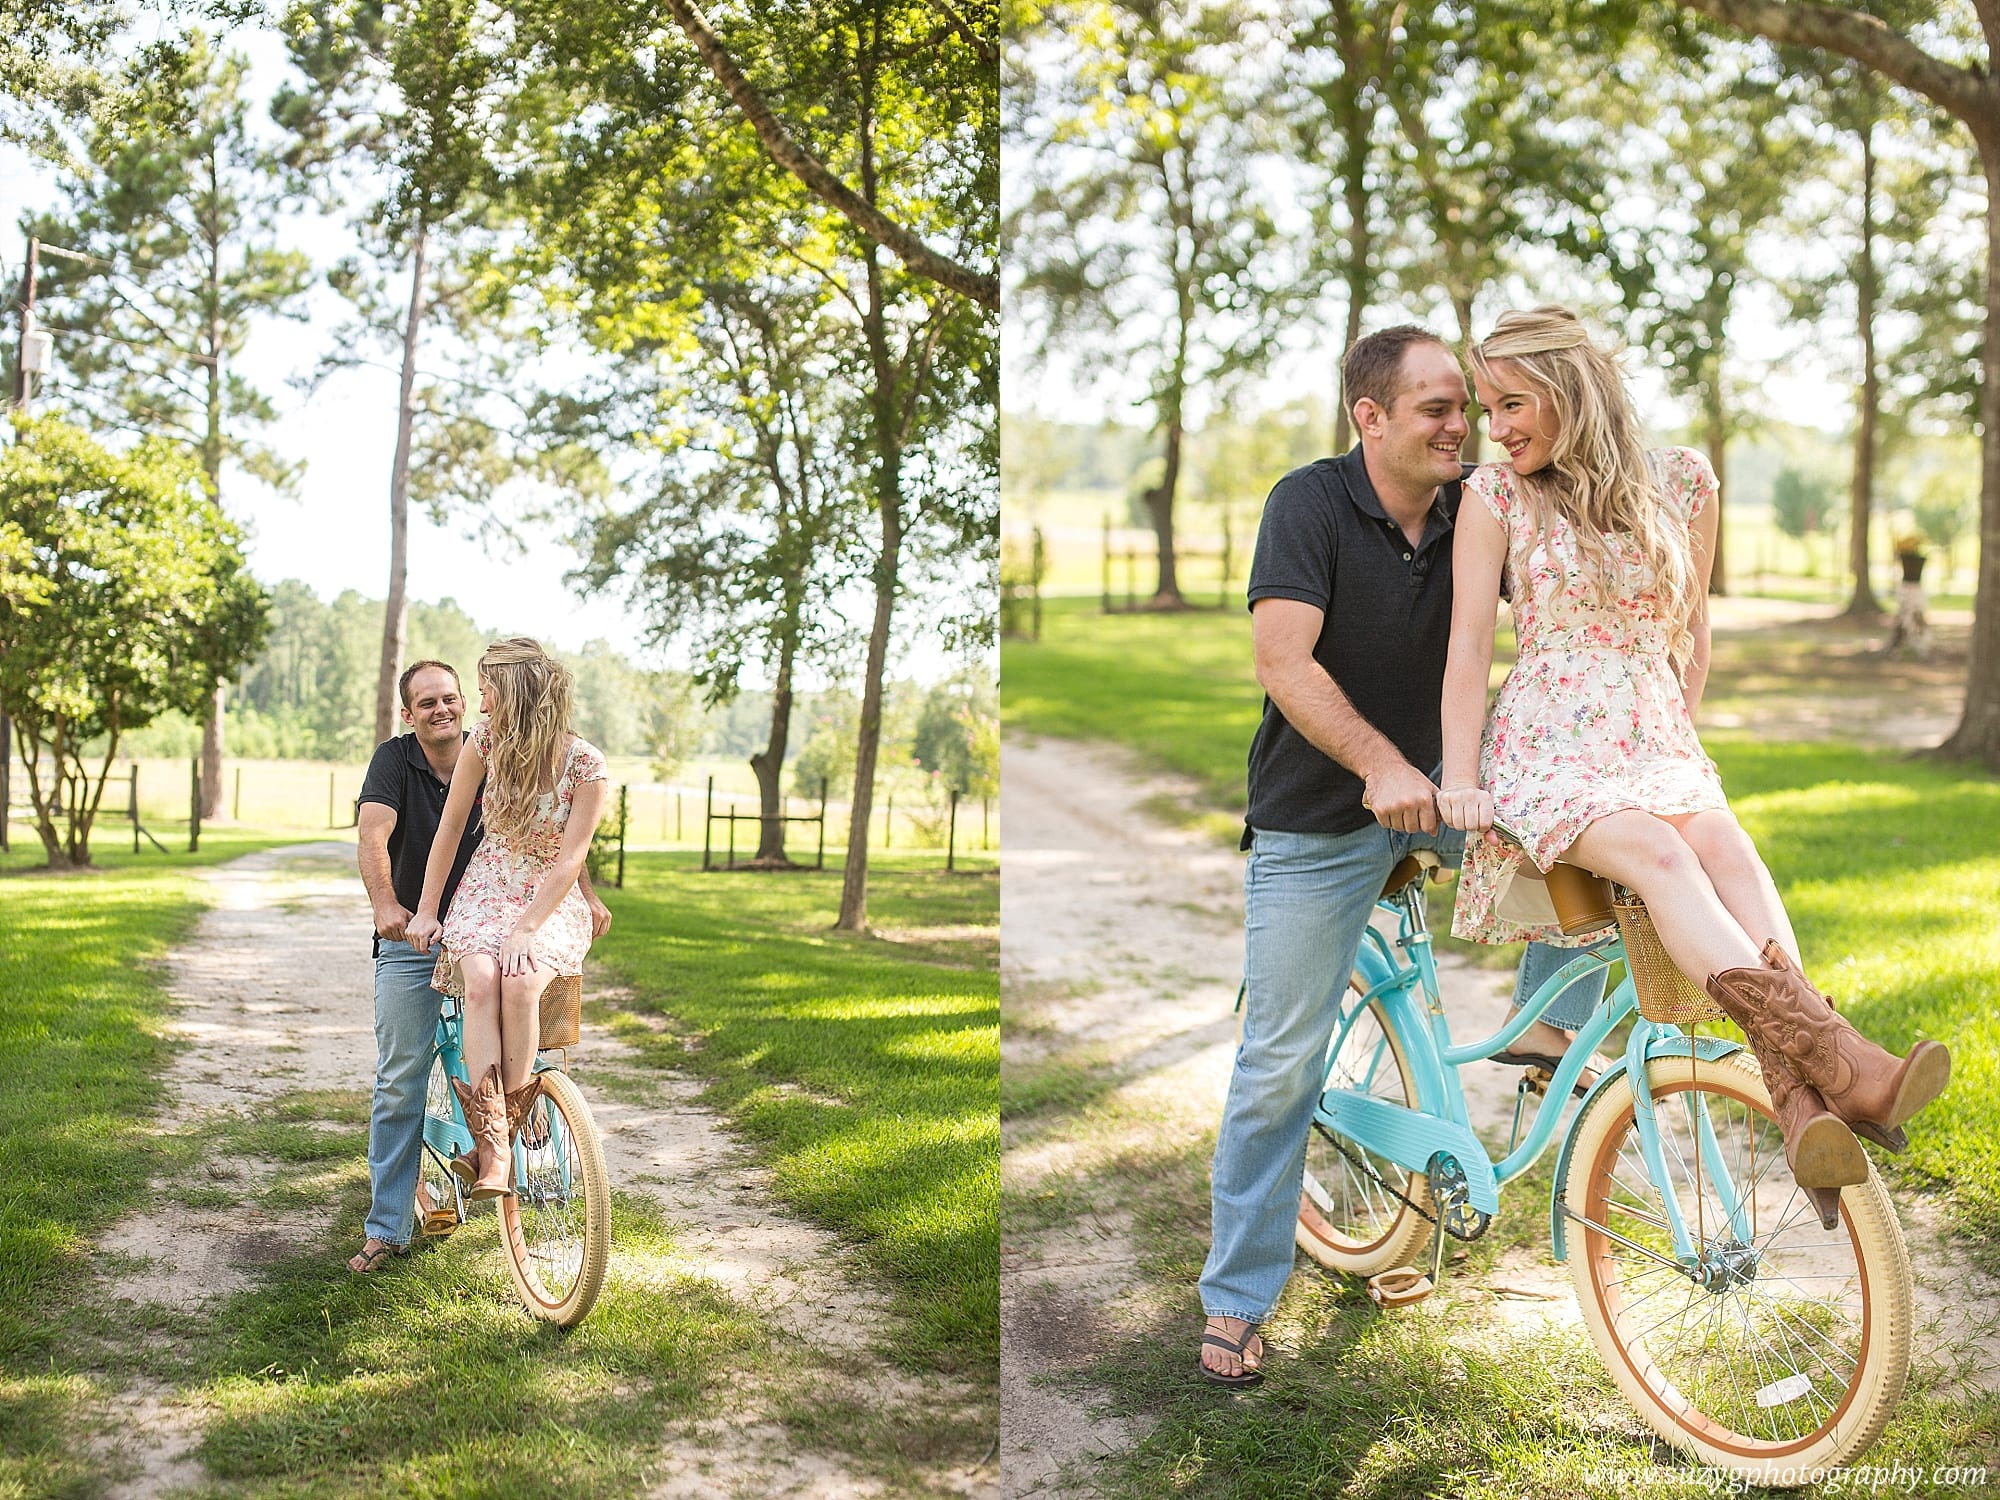 engagements-new orleans-texas-baton rouge-lake charles-suzy g-photography-suzygphotography_0002